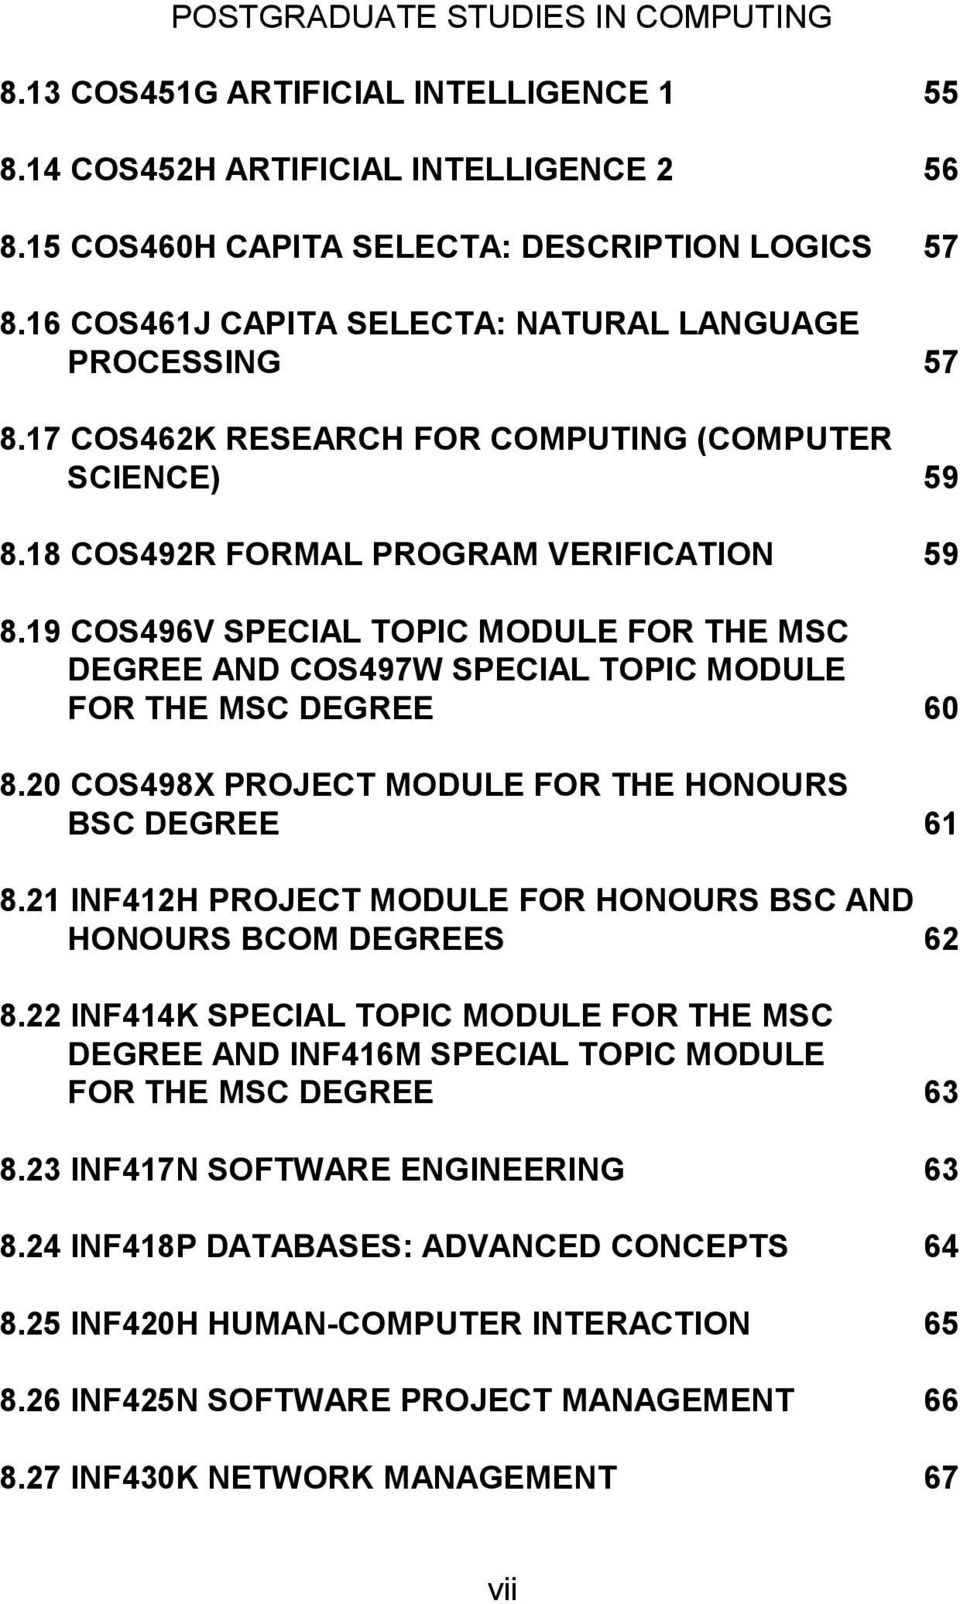 19 COS496V SPECIAL TOPIC MODULE FOR THE MSC DEGREE AND COS497W SPECIAL TOPIC MODULE FOR THE MSC DEGREE 60 8.20 COS498X PROJECT MODULE FOR THE HONOURS BSC DEGREE 61 8.